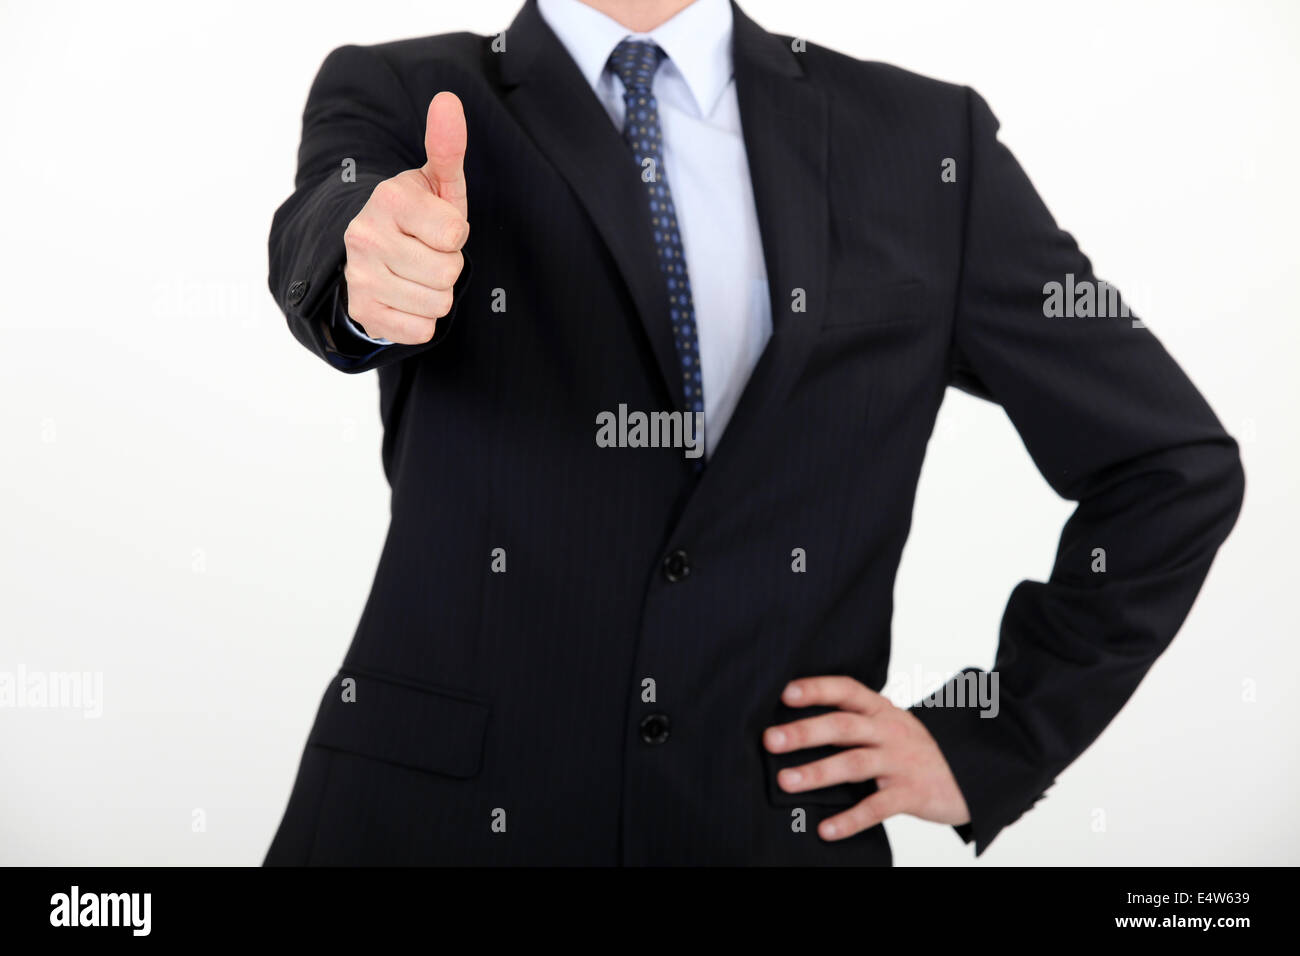 businessman making a thumbs up sign Stock Photo